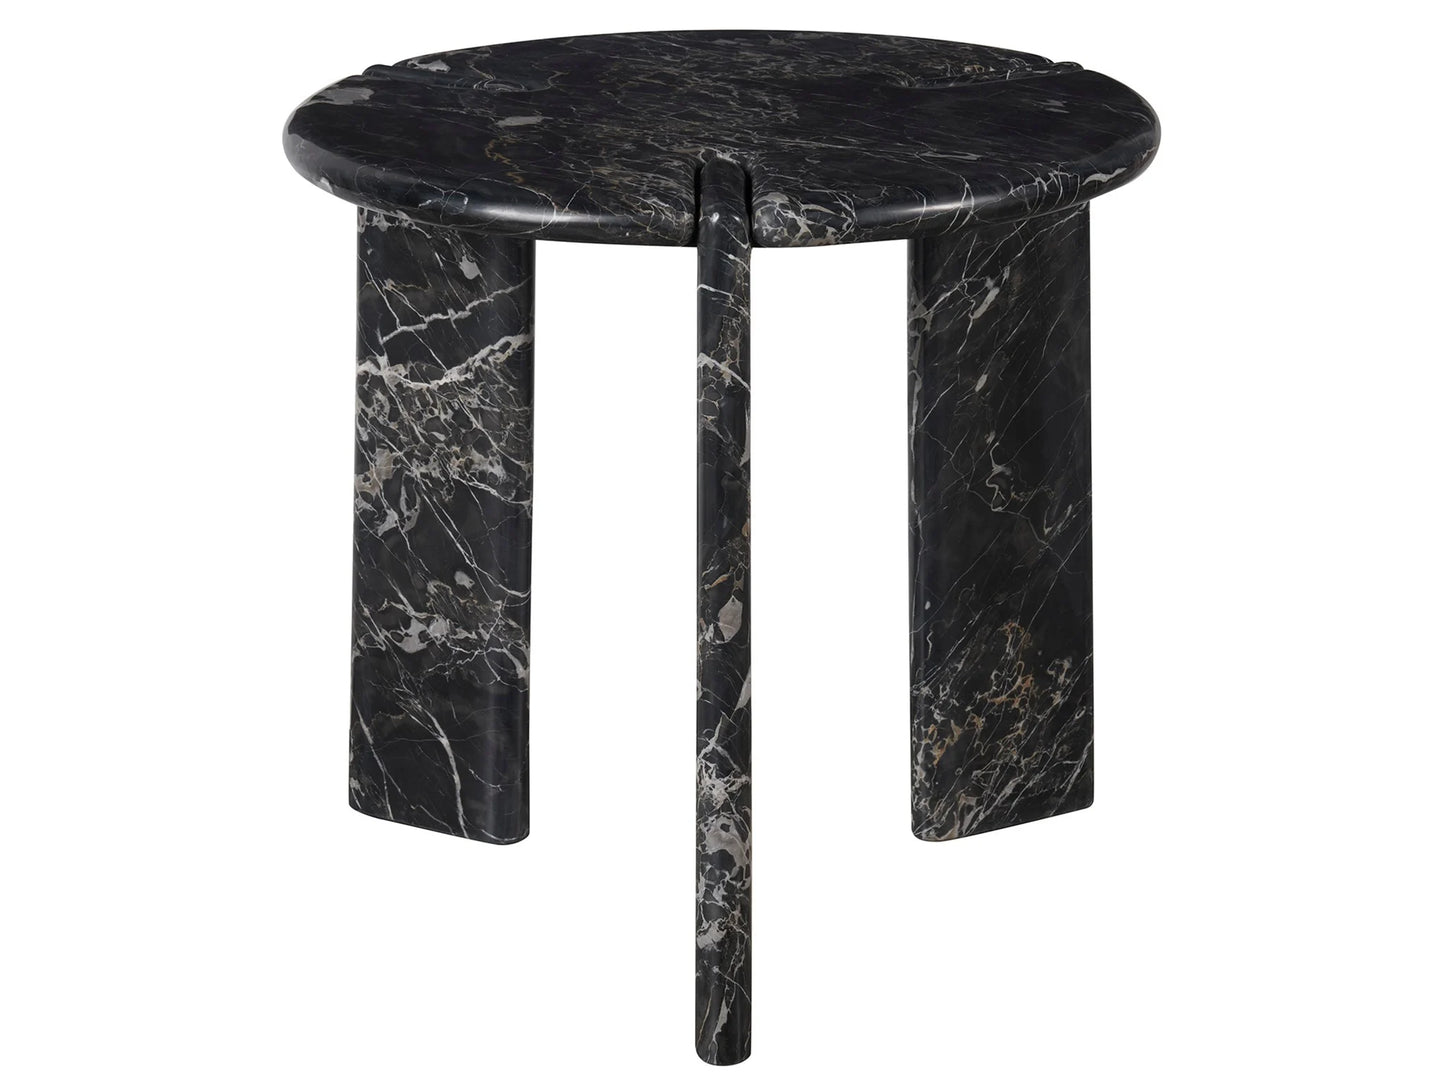 UNIVERSAL - NEW MODERN MAGNUS END TABLE